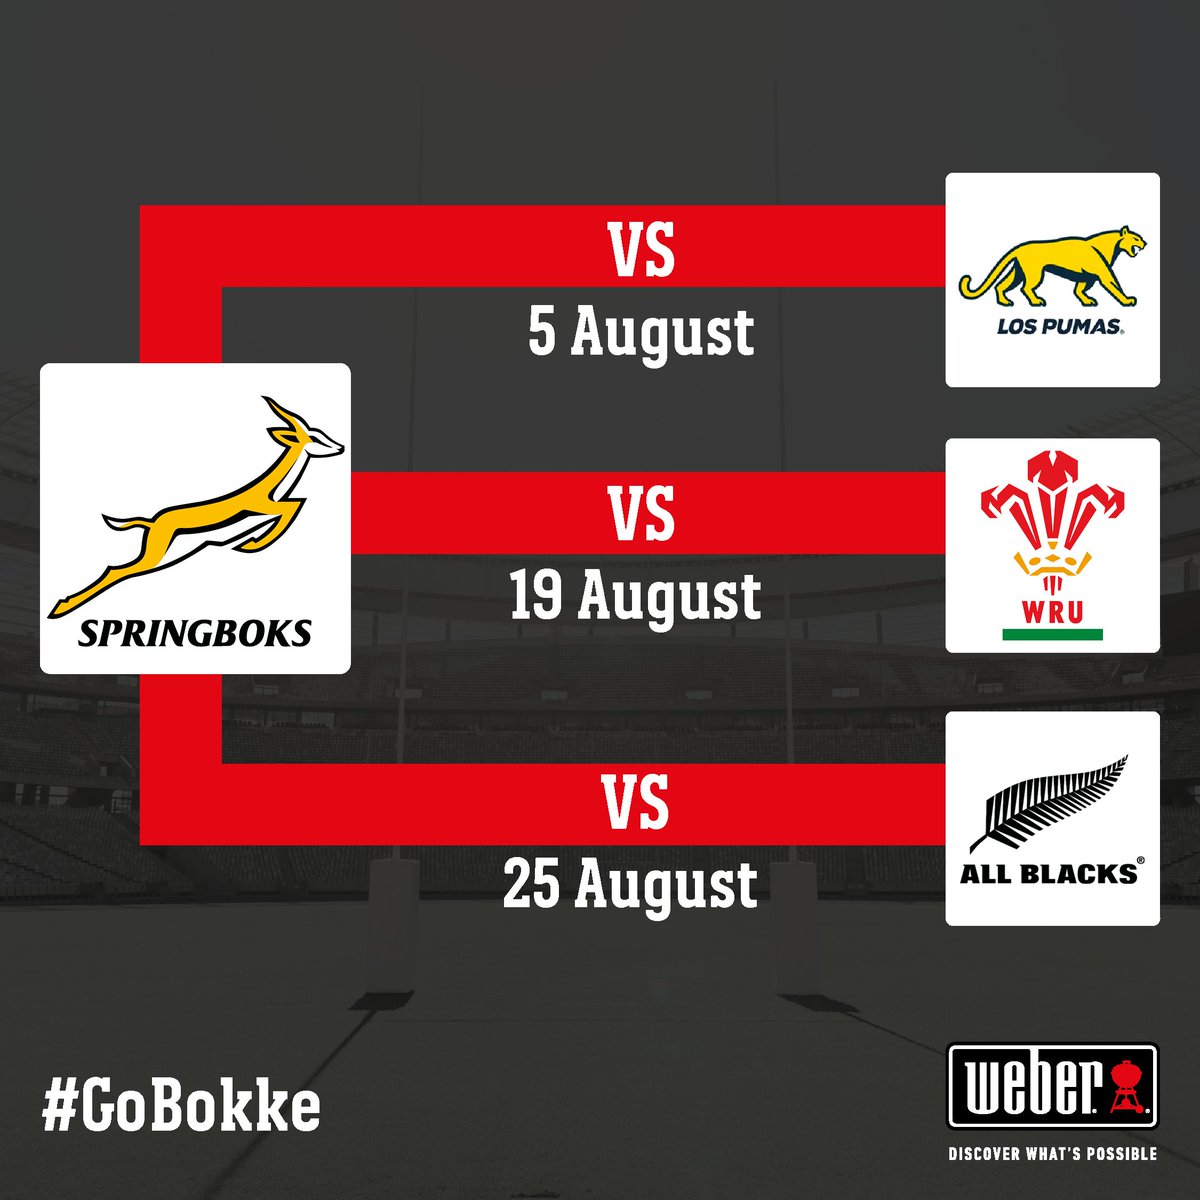 Take note of the special days to support the Bokke in August: Invite your friends over, braai and cheer on our boys together! 🇿🇦 #weberbraaisa #discoverwhatspossible #springboks #rugby #fixture #august #southafrica #support #gobokke #vs #argentina #wales #newzealand